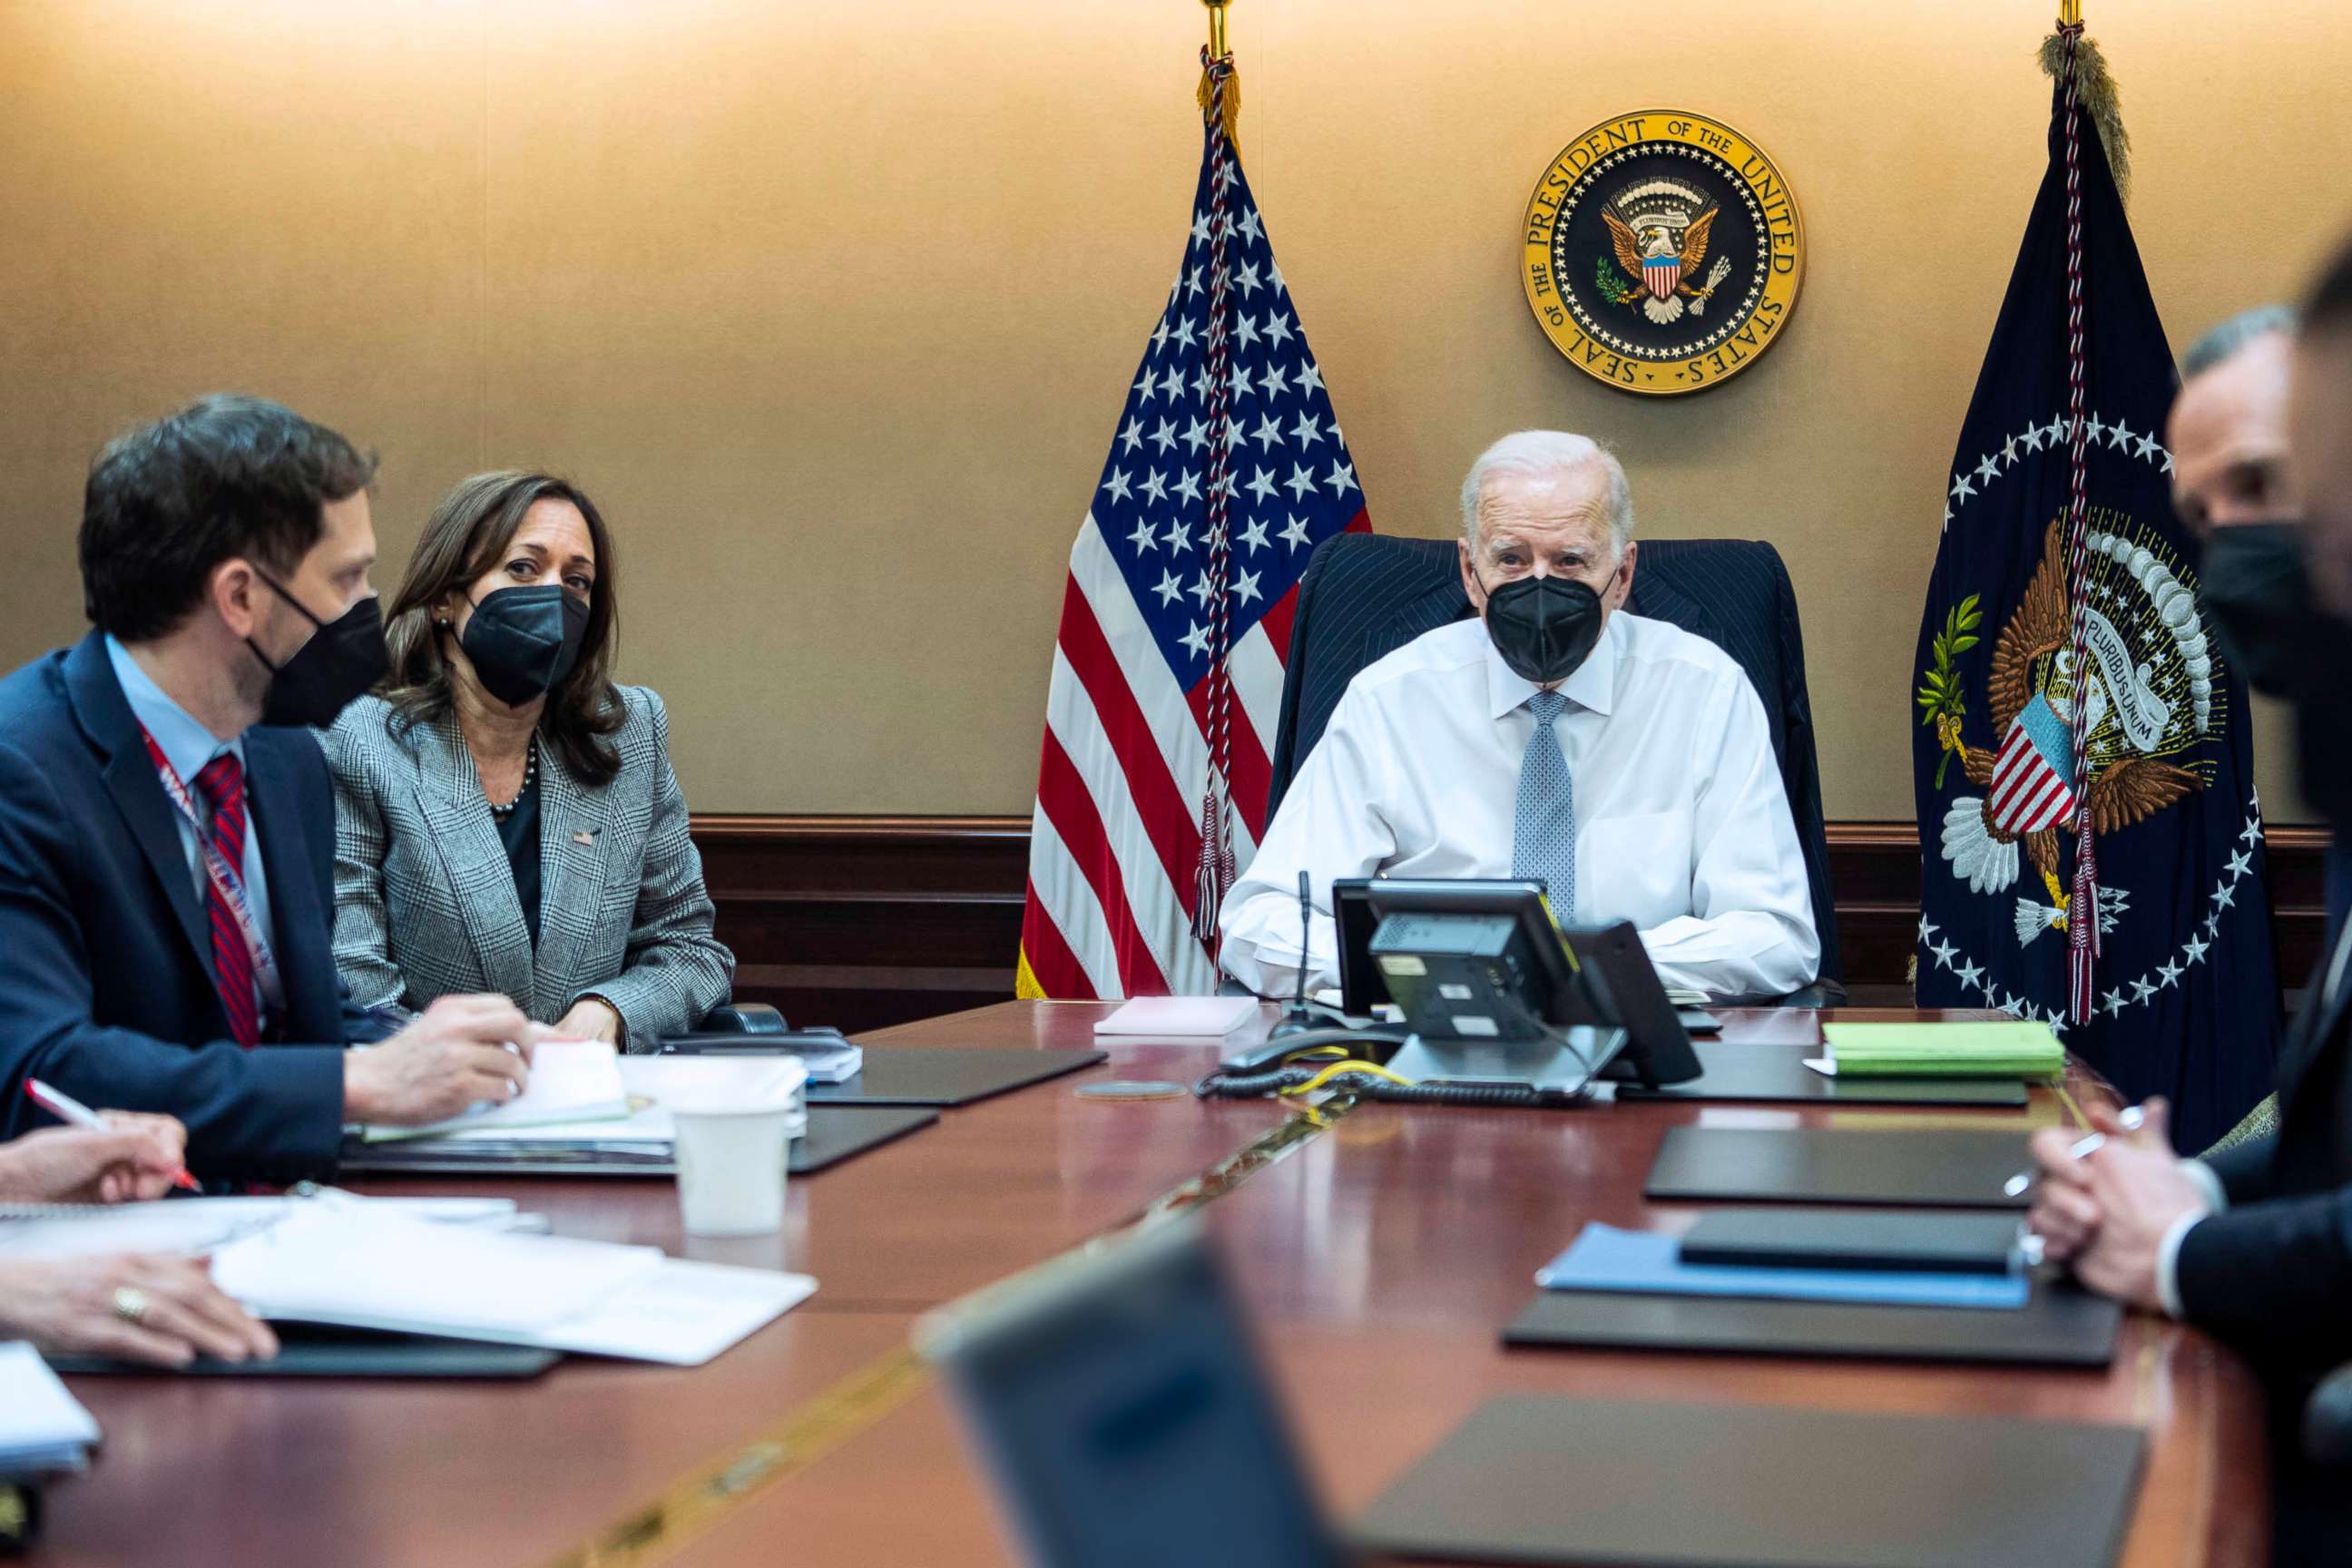 PHOTO: President Biden, Vice President Harris and members of the President's national security team observe the counterterrorism operation in Syria that they say killed the leader of ISIS from the Situation Room at the White House, Feb. 3, 2022.